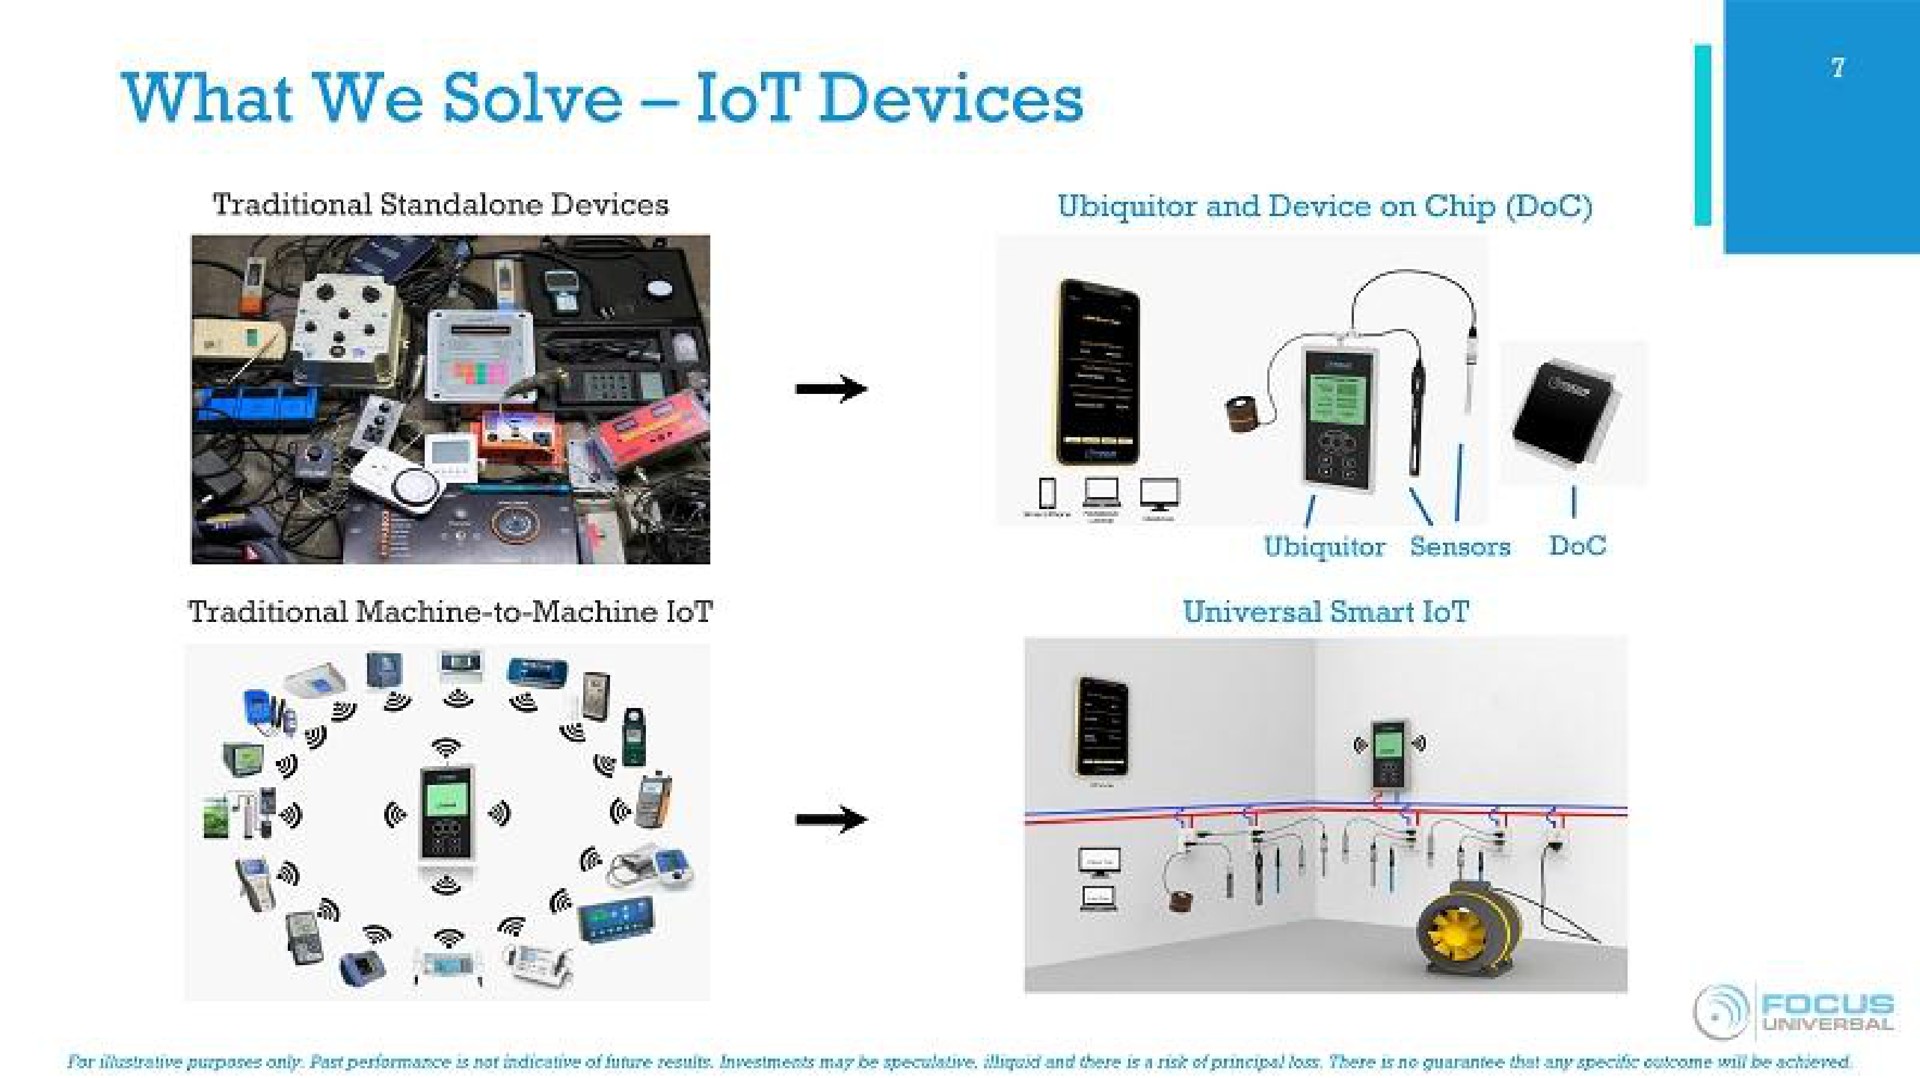 what we solve devices traditional devices and device on chip doc of | Focus Universal